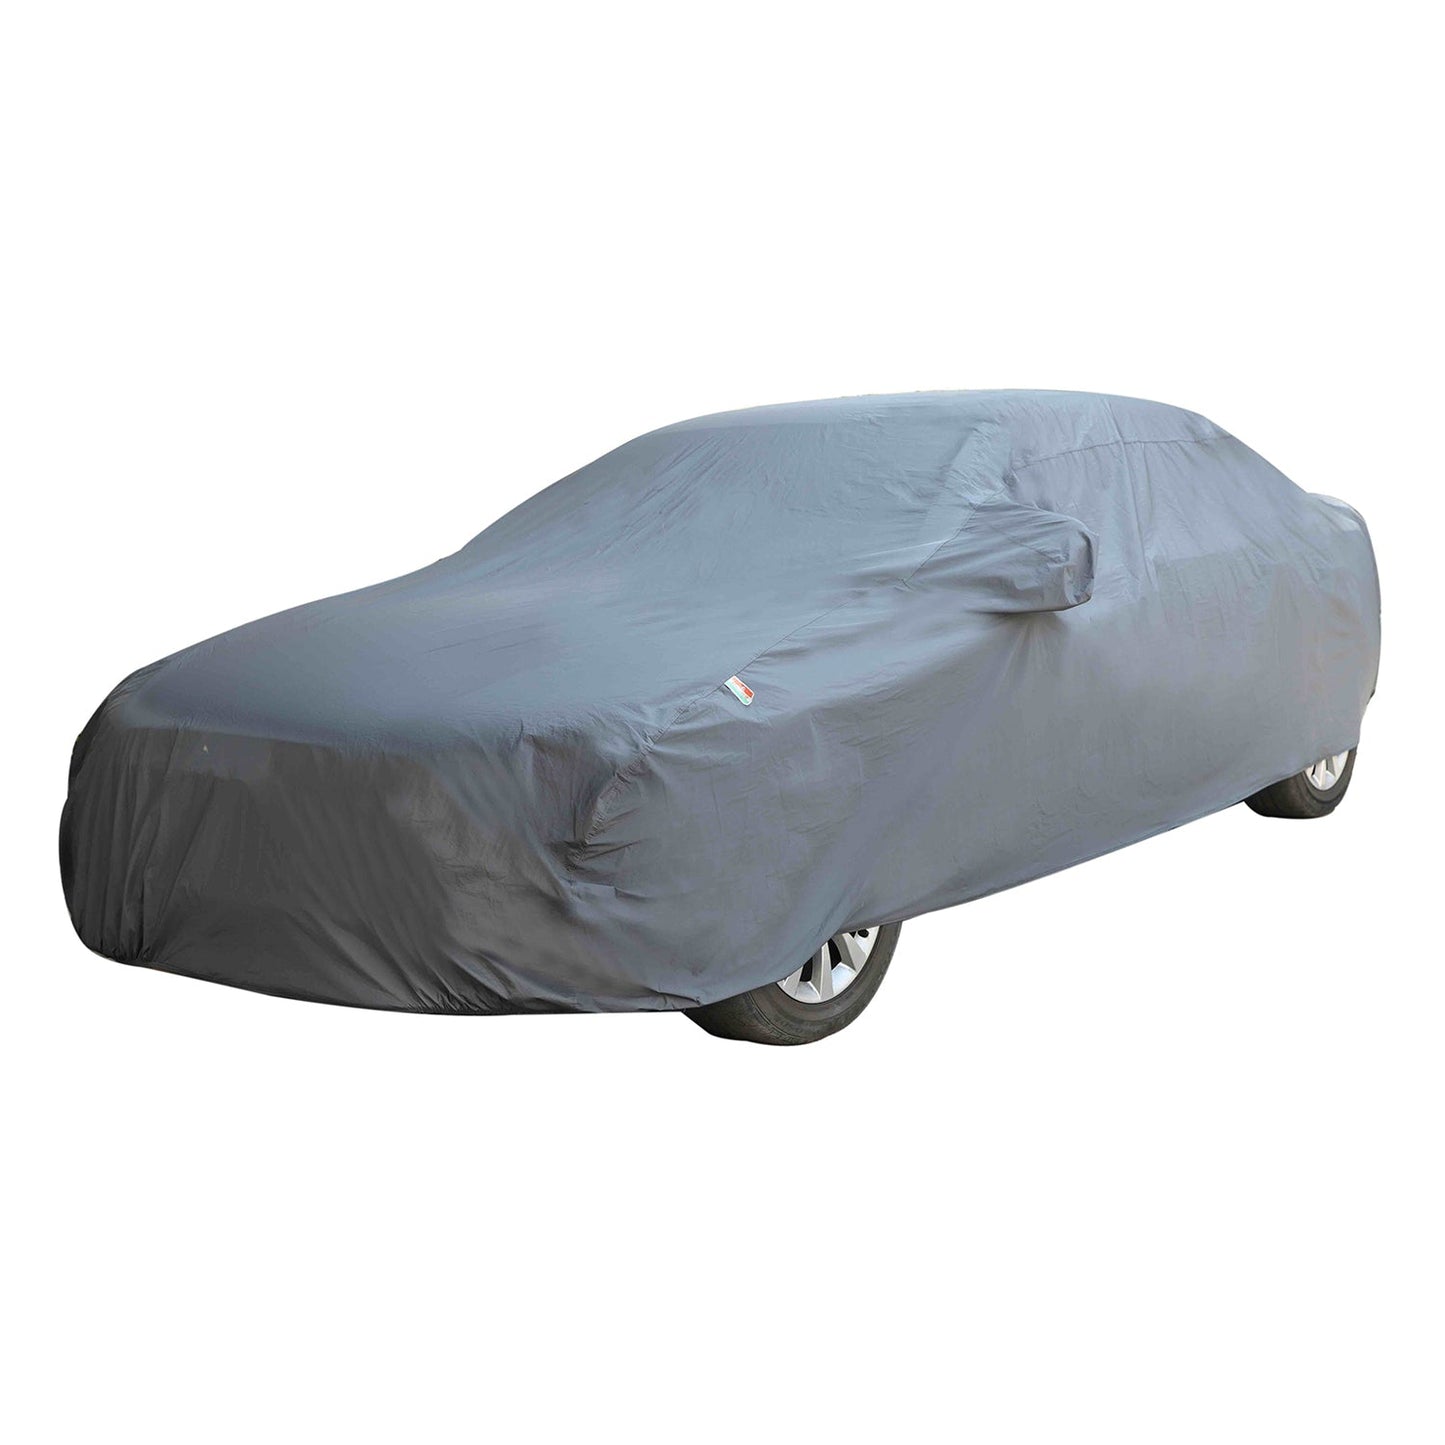 Oshotto Dark Grey 100% Anti Reflective, dustproof and Water Proof Car Body Cover with Mirror Pockets For Tata Tiago